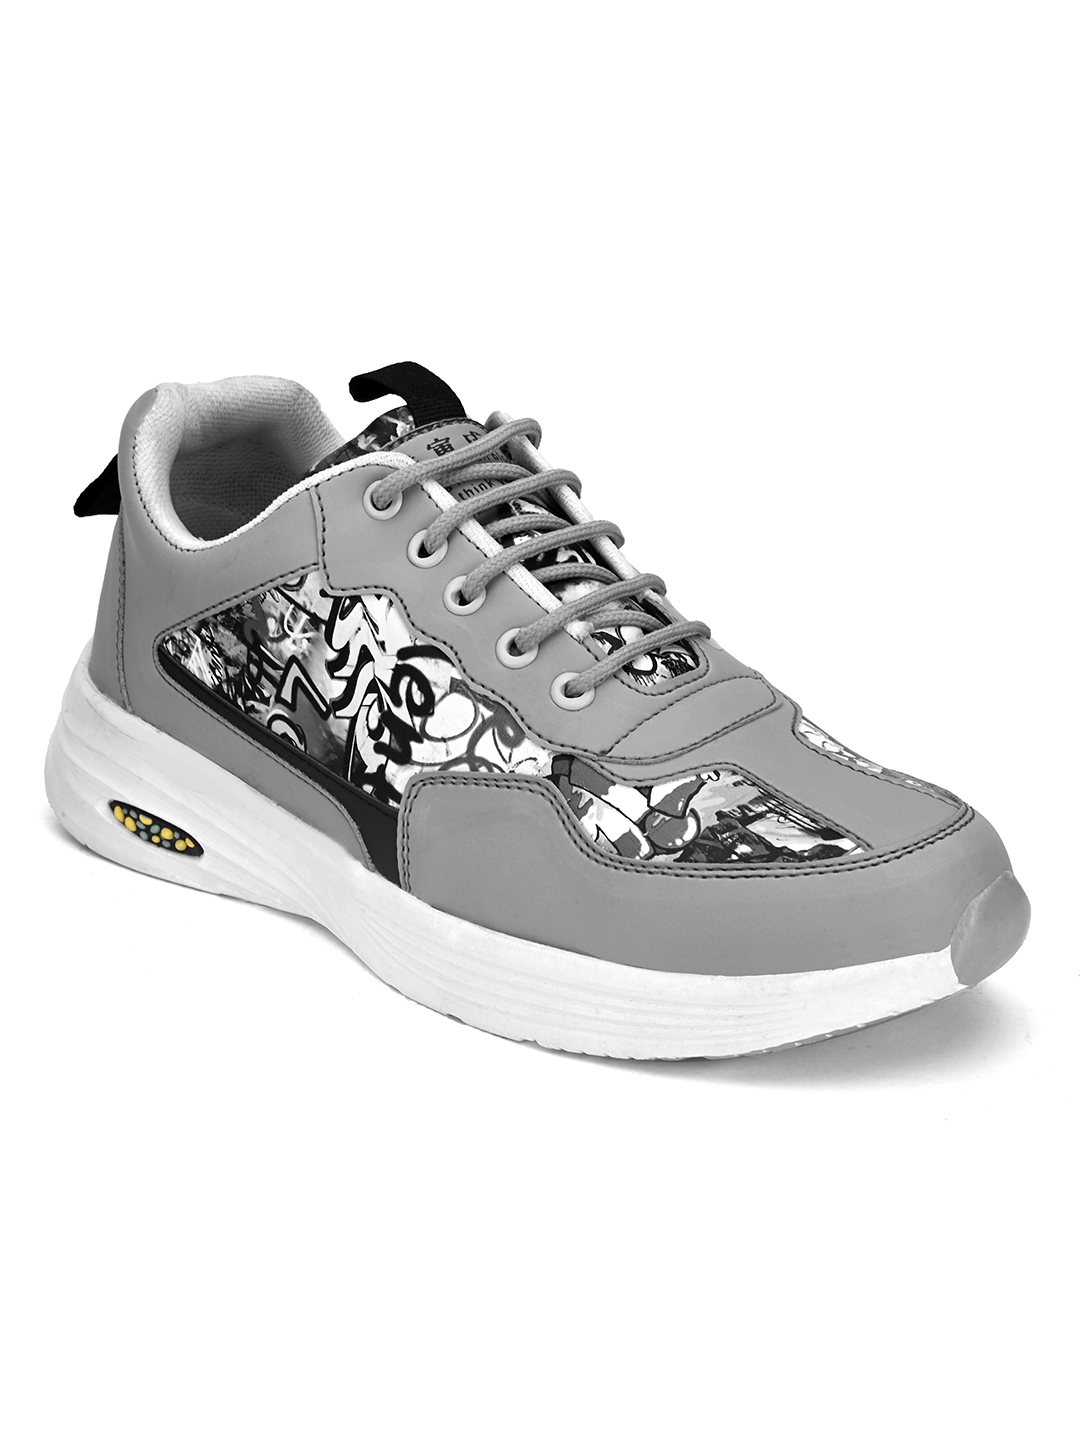 RAY J Grey Lace-Up Sneakers For Men